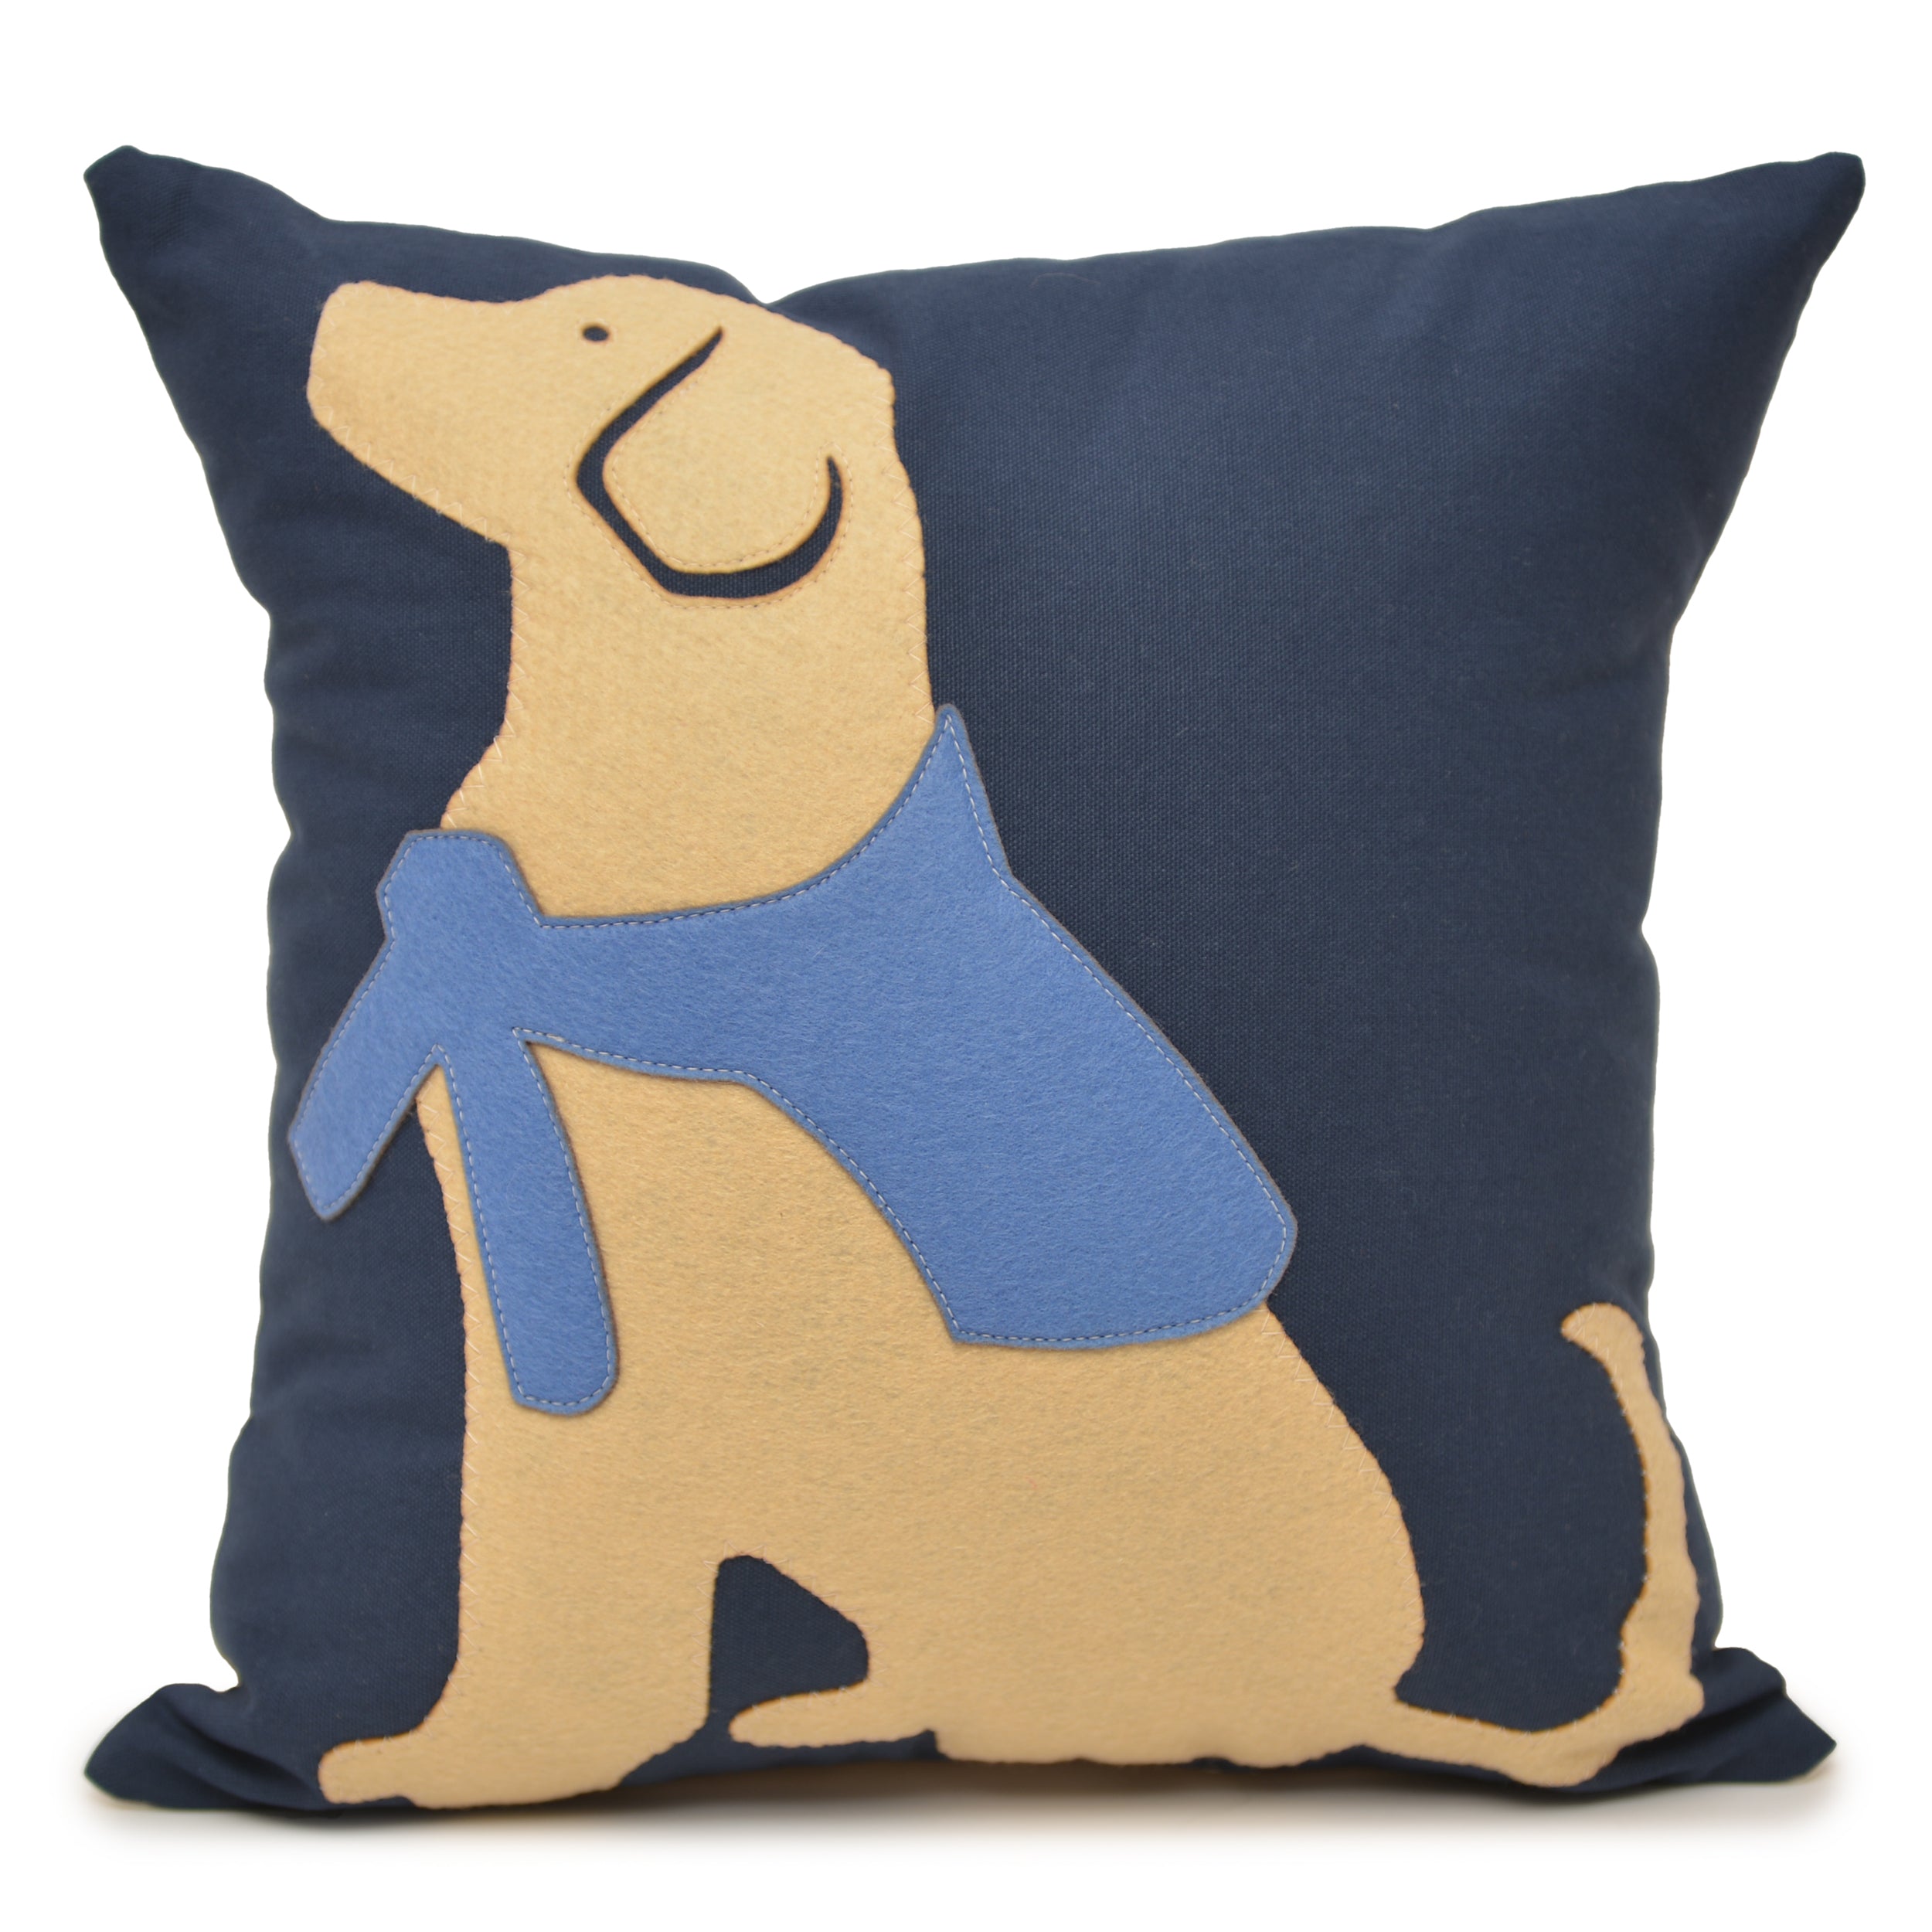 18x18" Honey the yellow lab with preppy sweater pillow